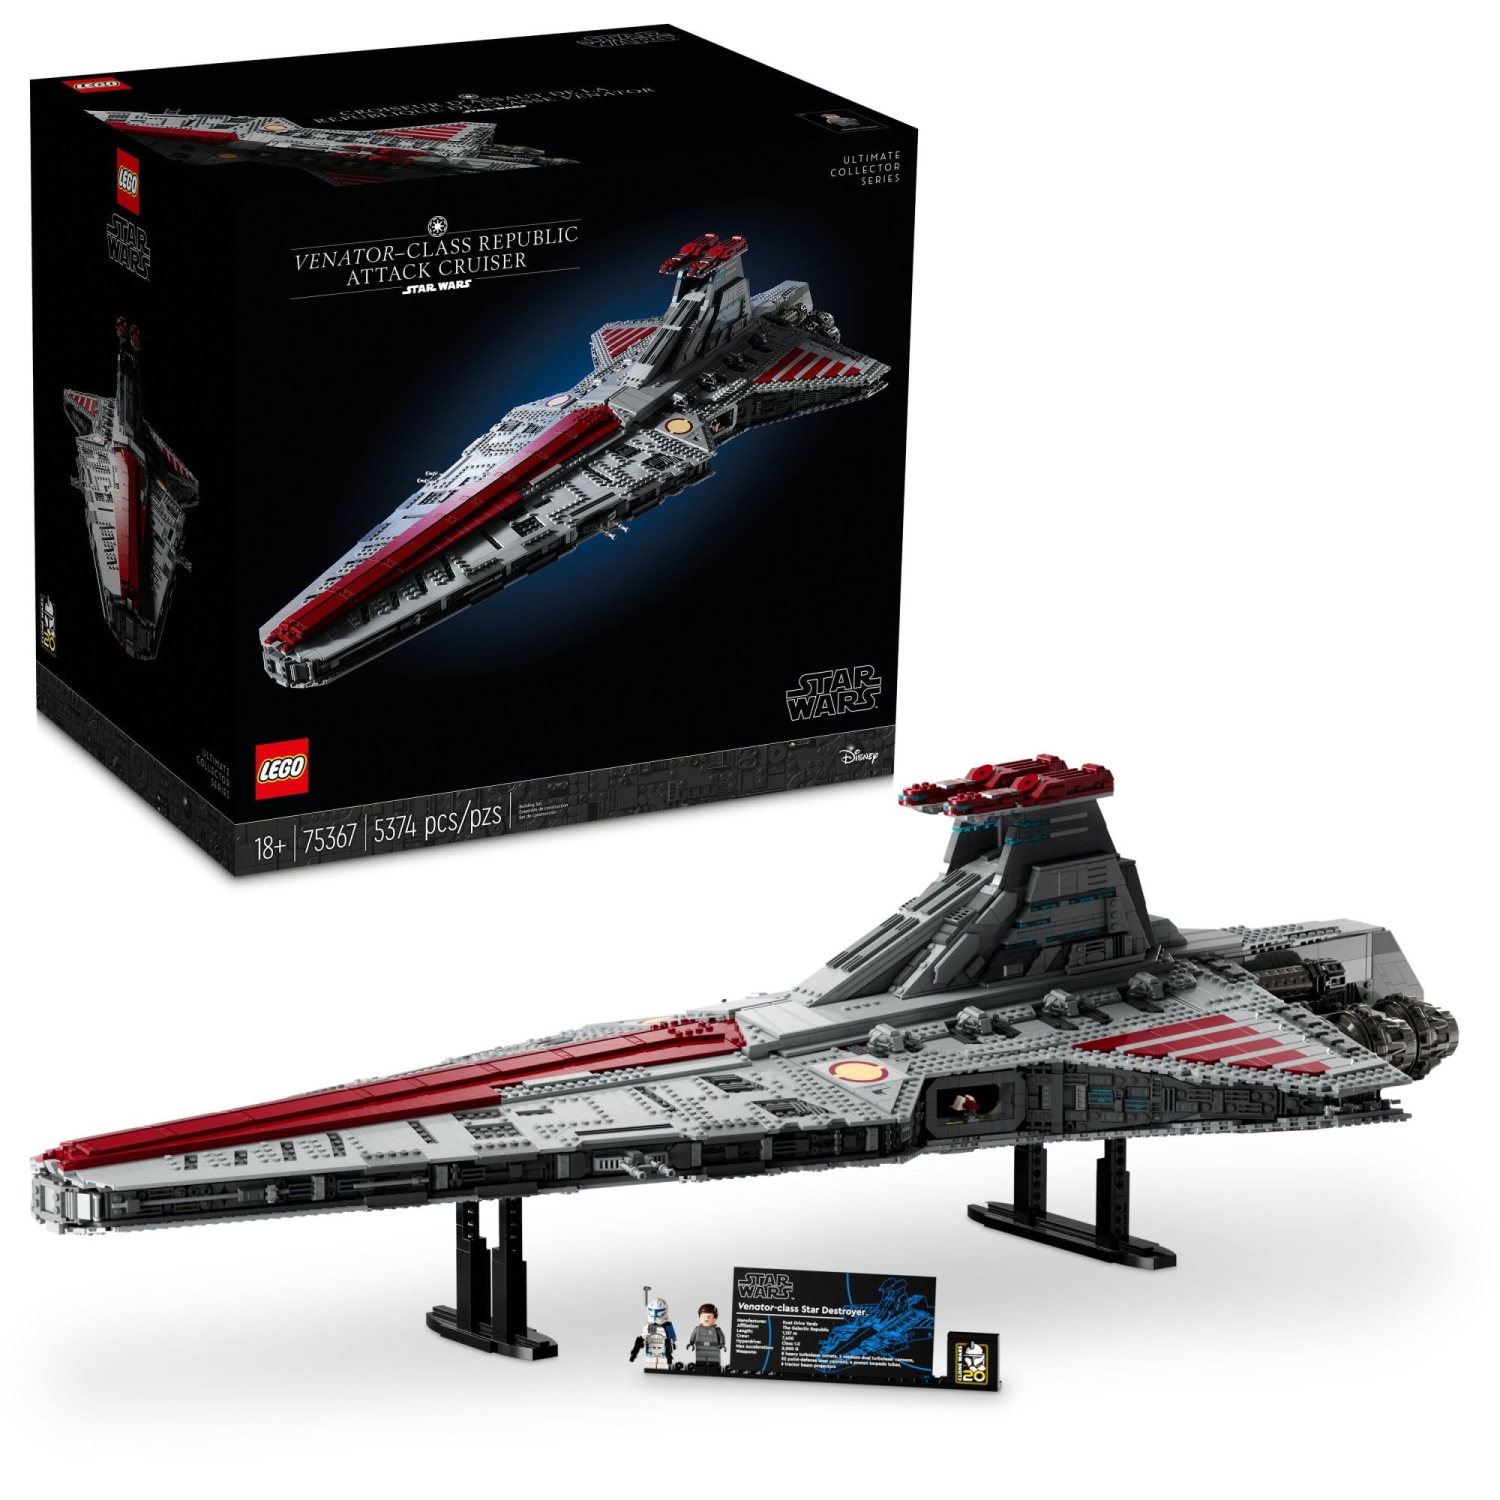 LEGO Star Wars Venator-Class Republic Attack Cruiser, Ultimate Collector Series Building Set for Adults